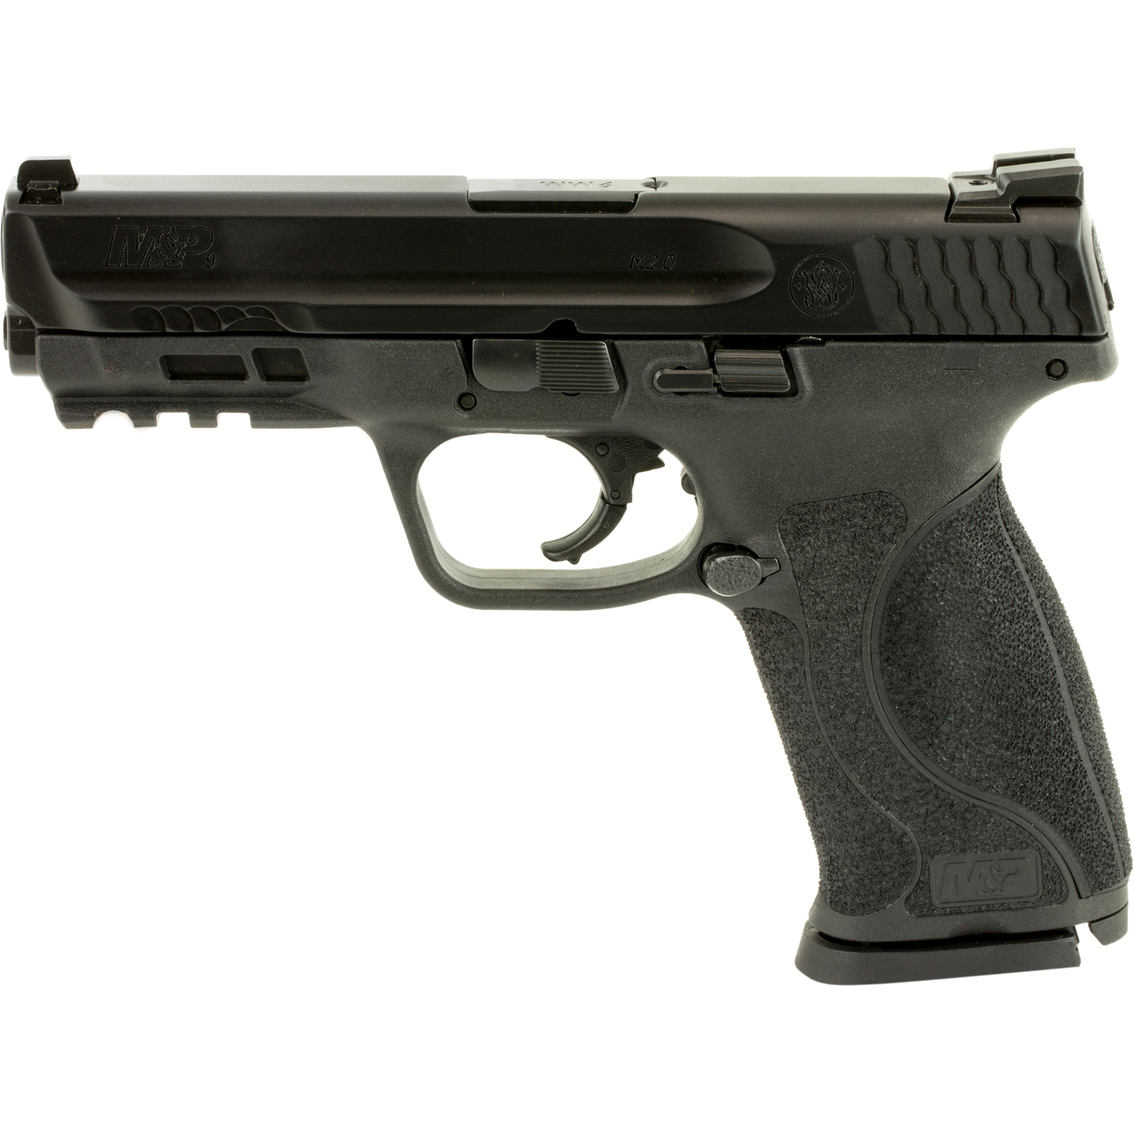 S&W M&P 2.0 9MM 4.25 in. Barrel 17 Rds 3-Mags Pistol Black - Image 2 of 3